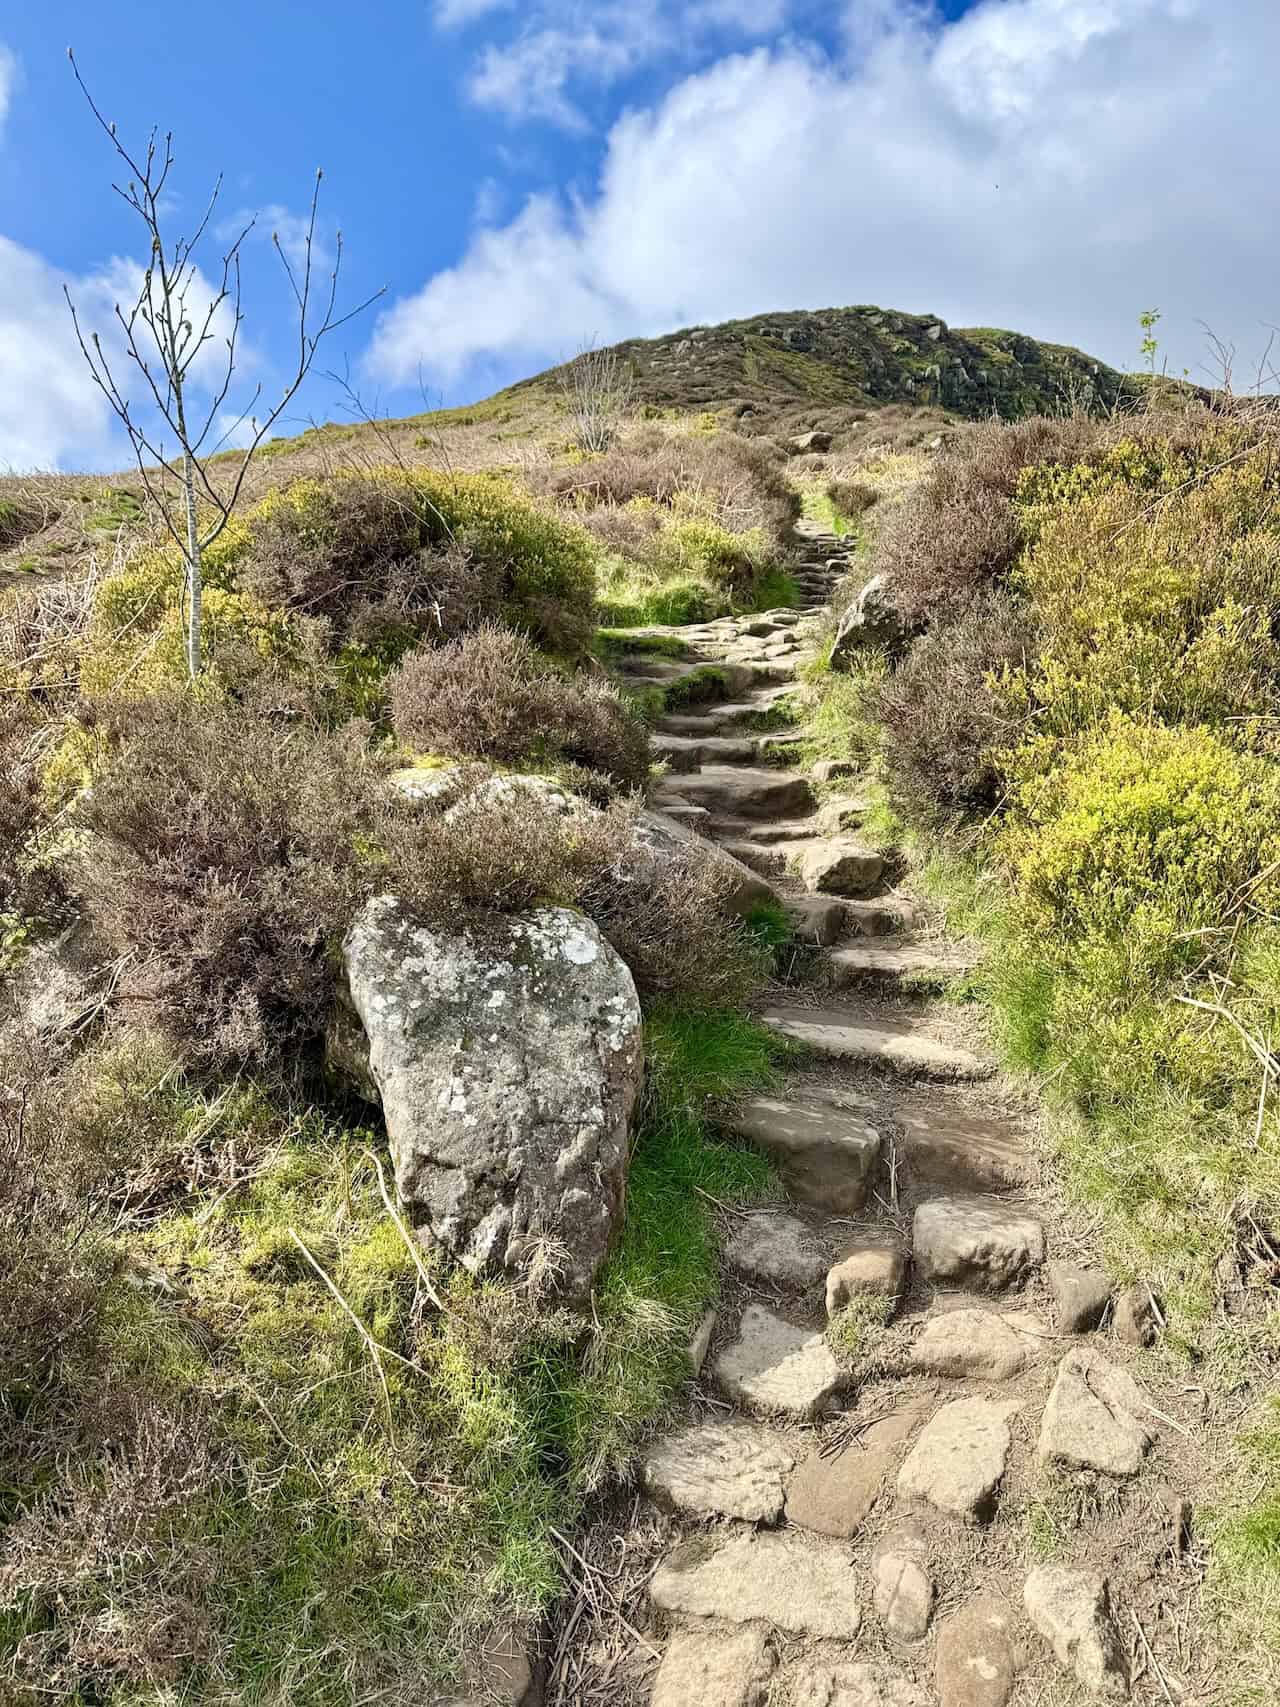 The steps leading up the side of Kirby Bank to reach the top of Cringle Moor. Kirby Bank is the northern-facing side of Cringle Moor. We continue our journey on the Cleveland Way.